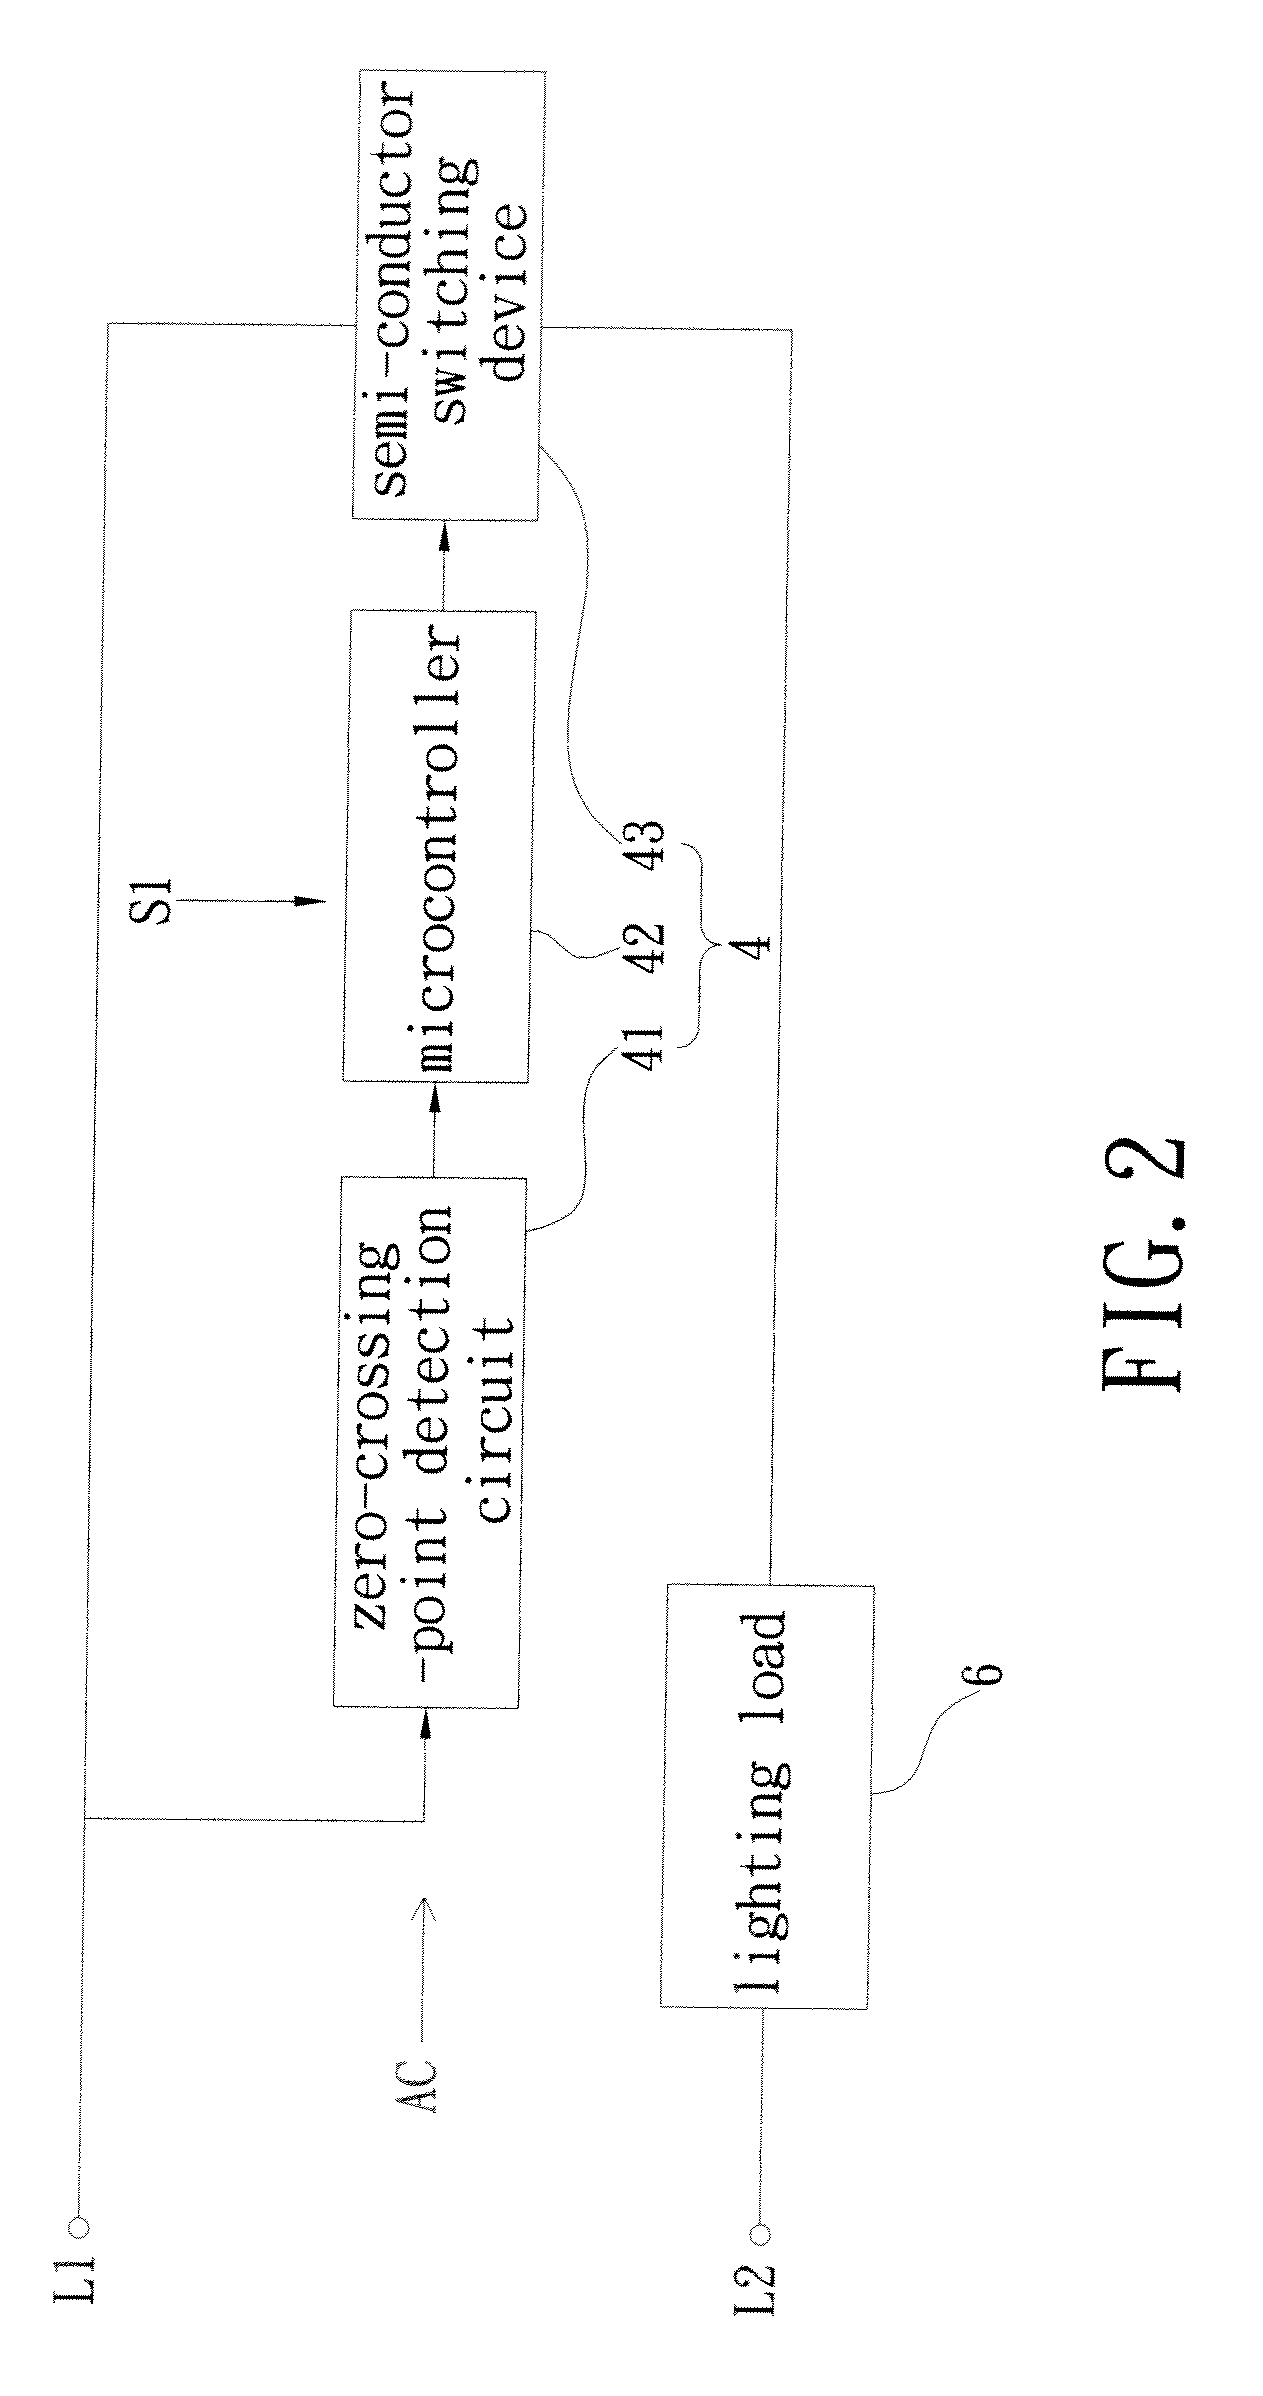 Microcontroller-based lighting control system and method for lighting control